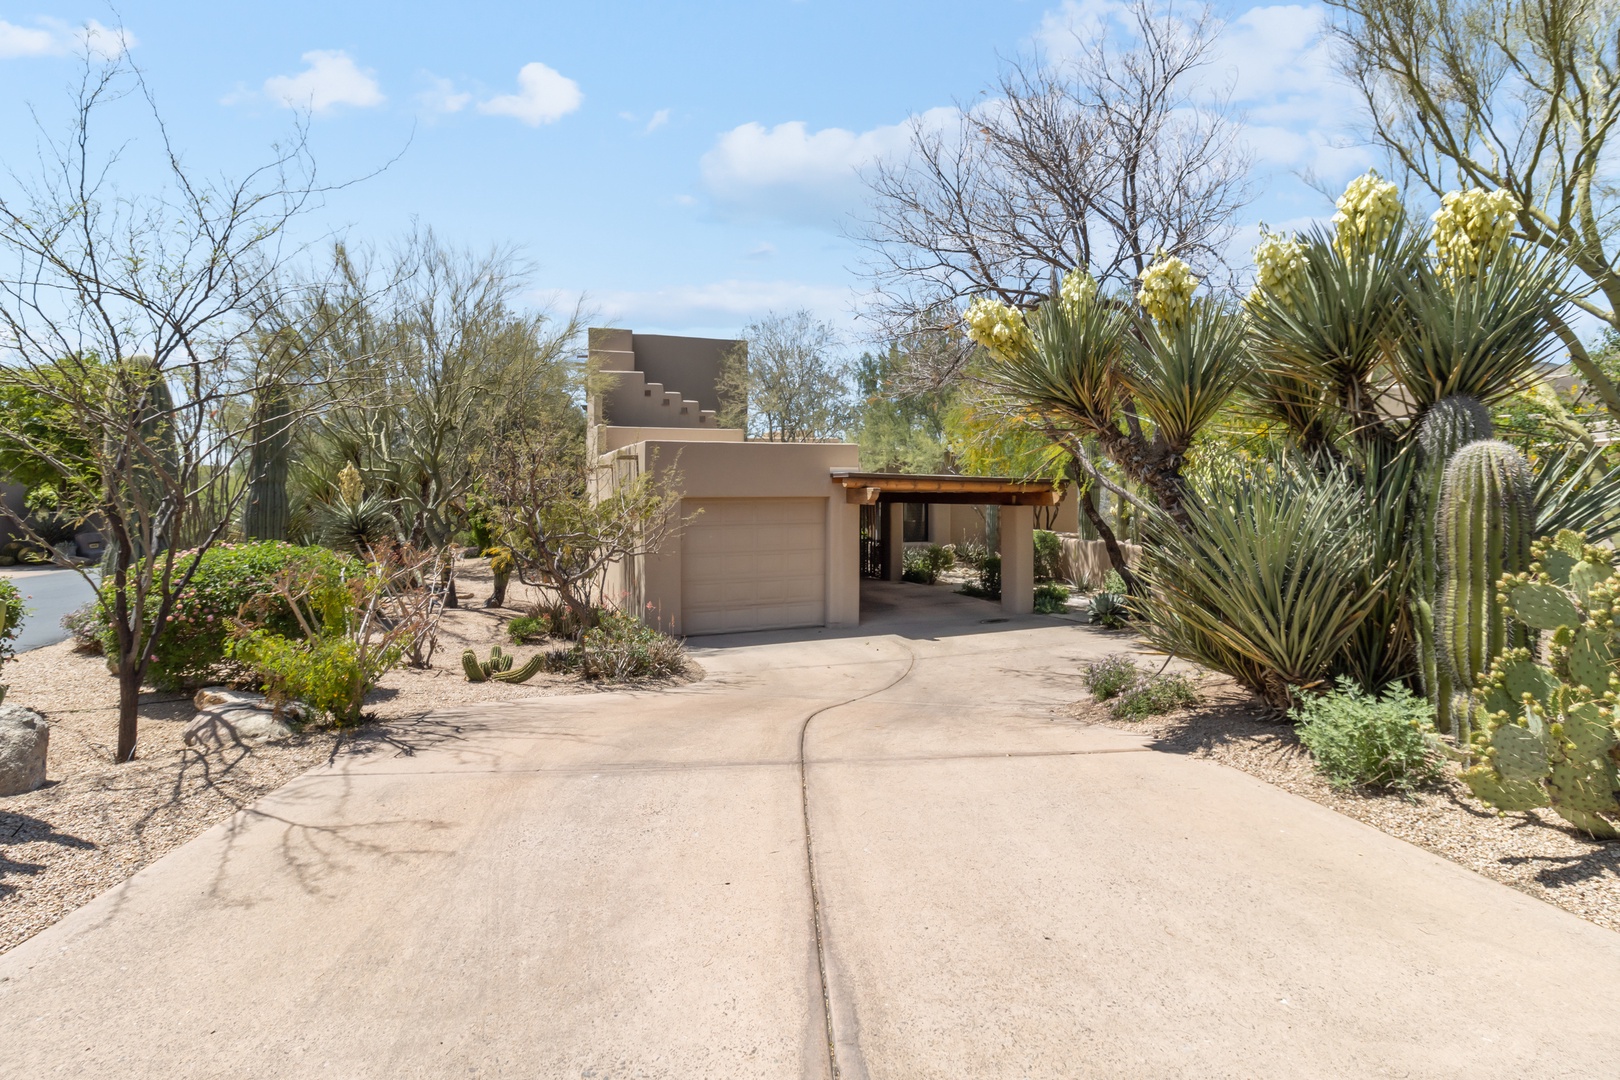 Scottsdale Vacation Rentals, Boulders Hideaway Villa - Access to 2 community pools/spas included in rent. Optional tenant club membership available for additional cost.